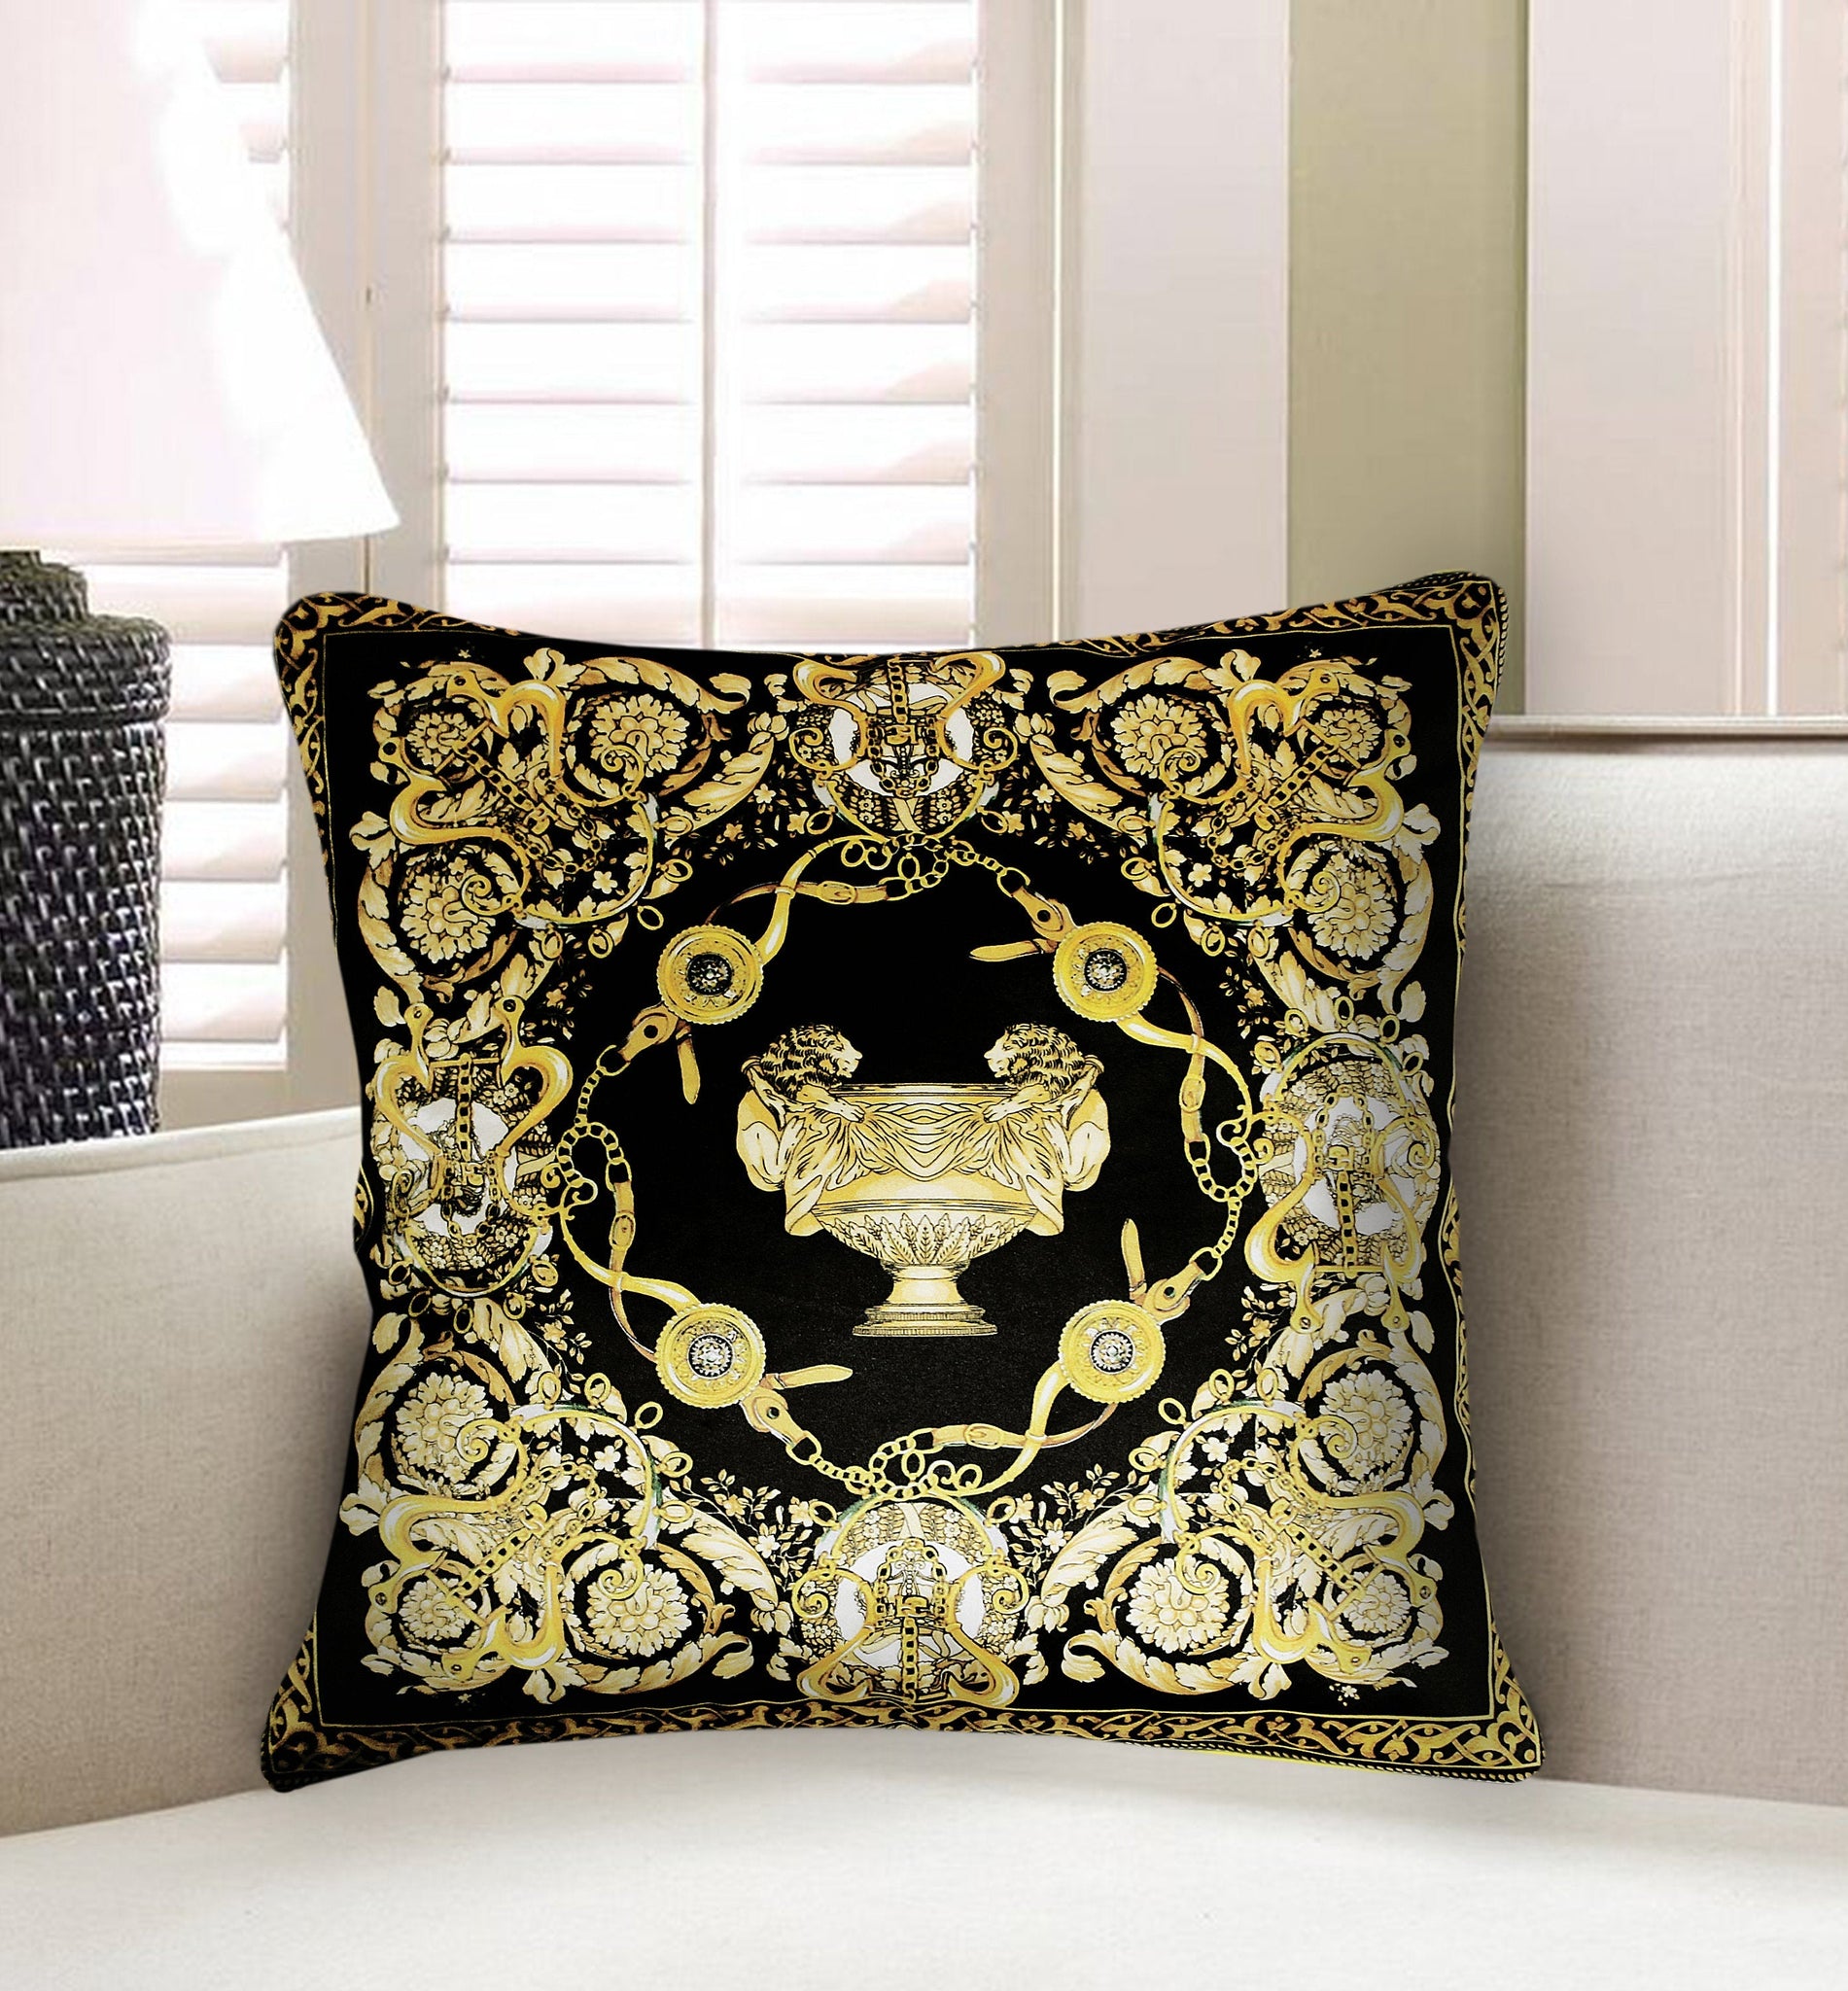  Velvet Cushion Cover Classic Baroque Style Decorative pillowcase, Traditional Floral Motif and Antique Greek Cup Décor Throw Pillow for Sofa Chair Bedroom Living Room Multi Color 45x45cm (18x18 Inches)